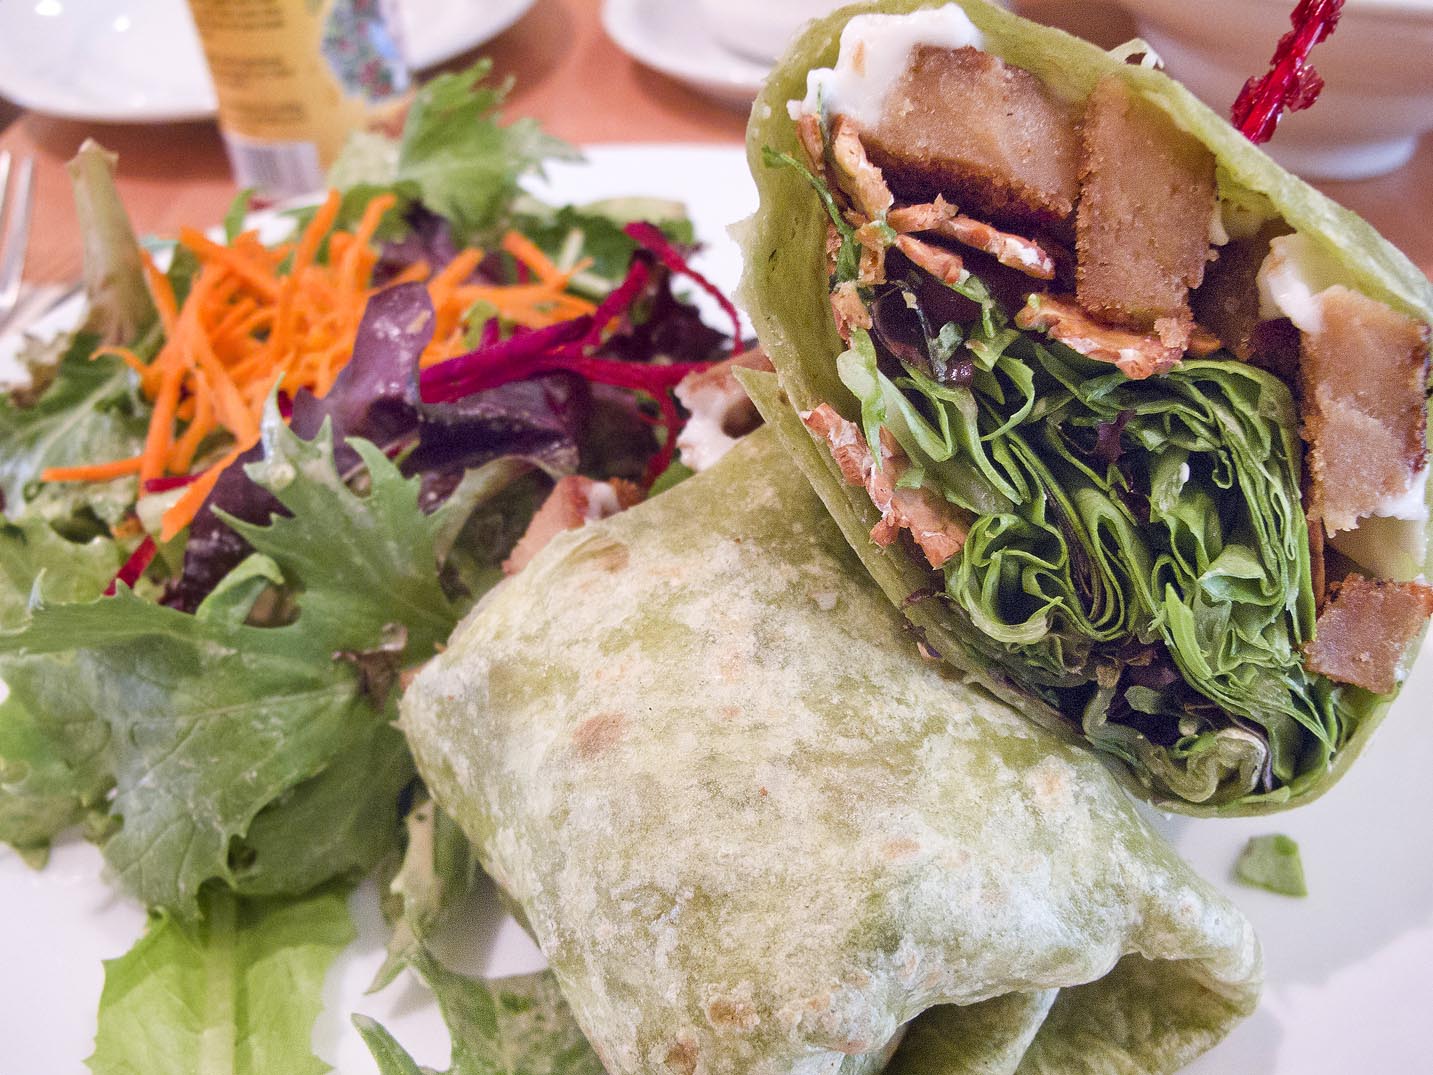 A club wrap of vegetarian ingredients from Real Food Daily in Los Angeles.